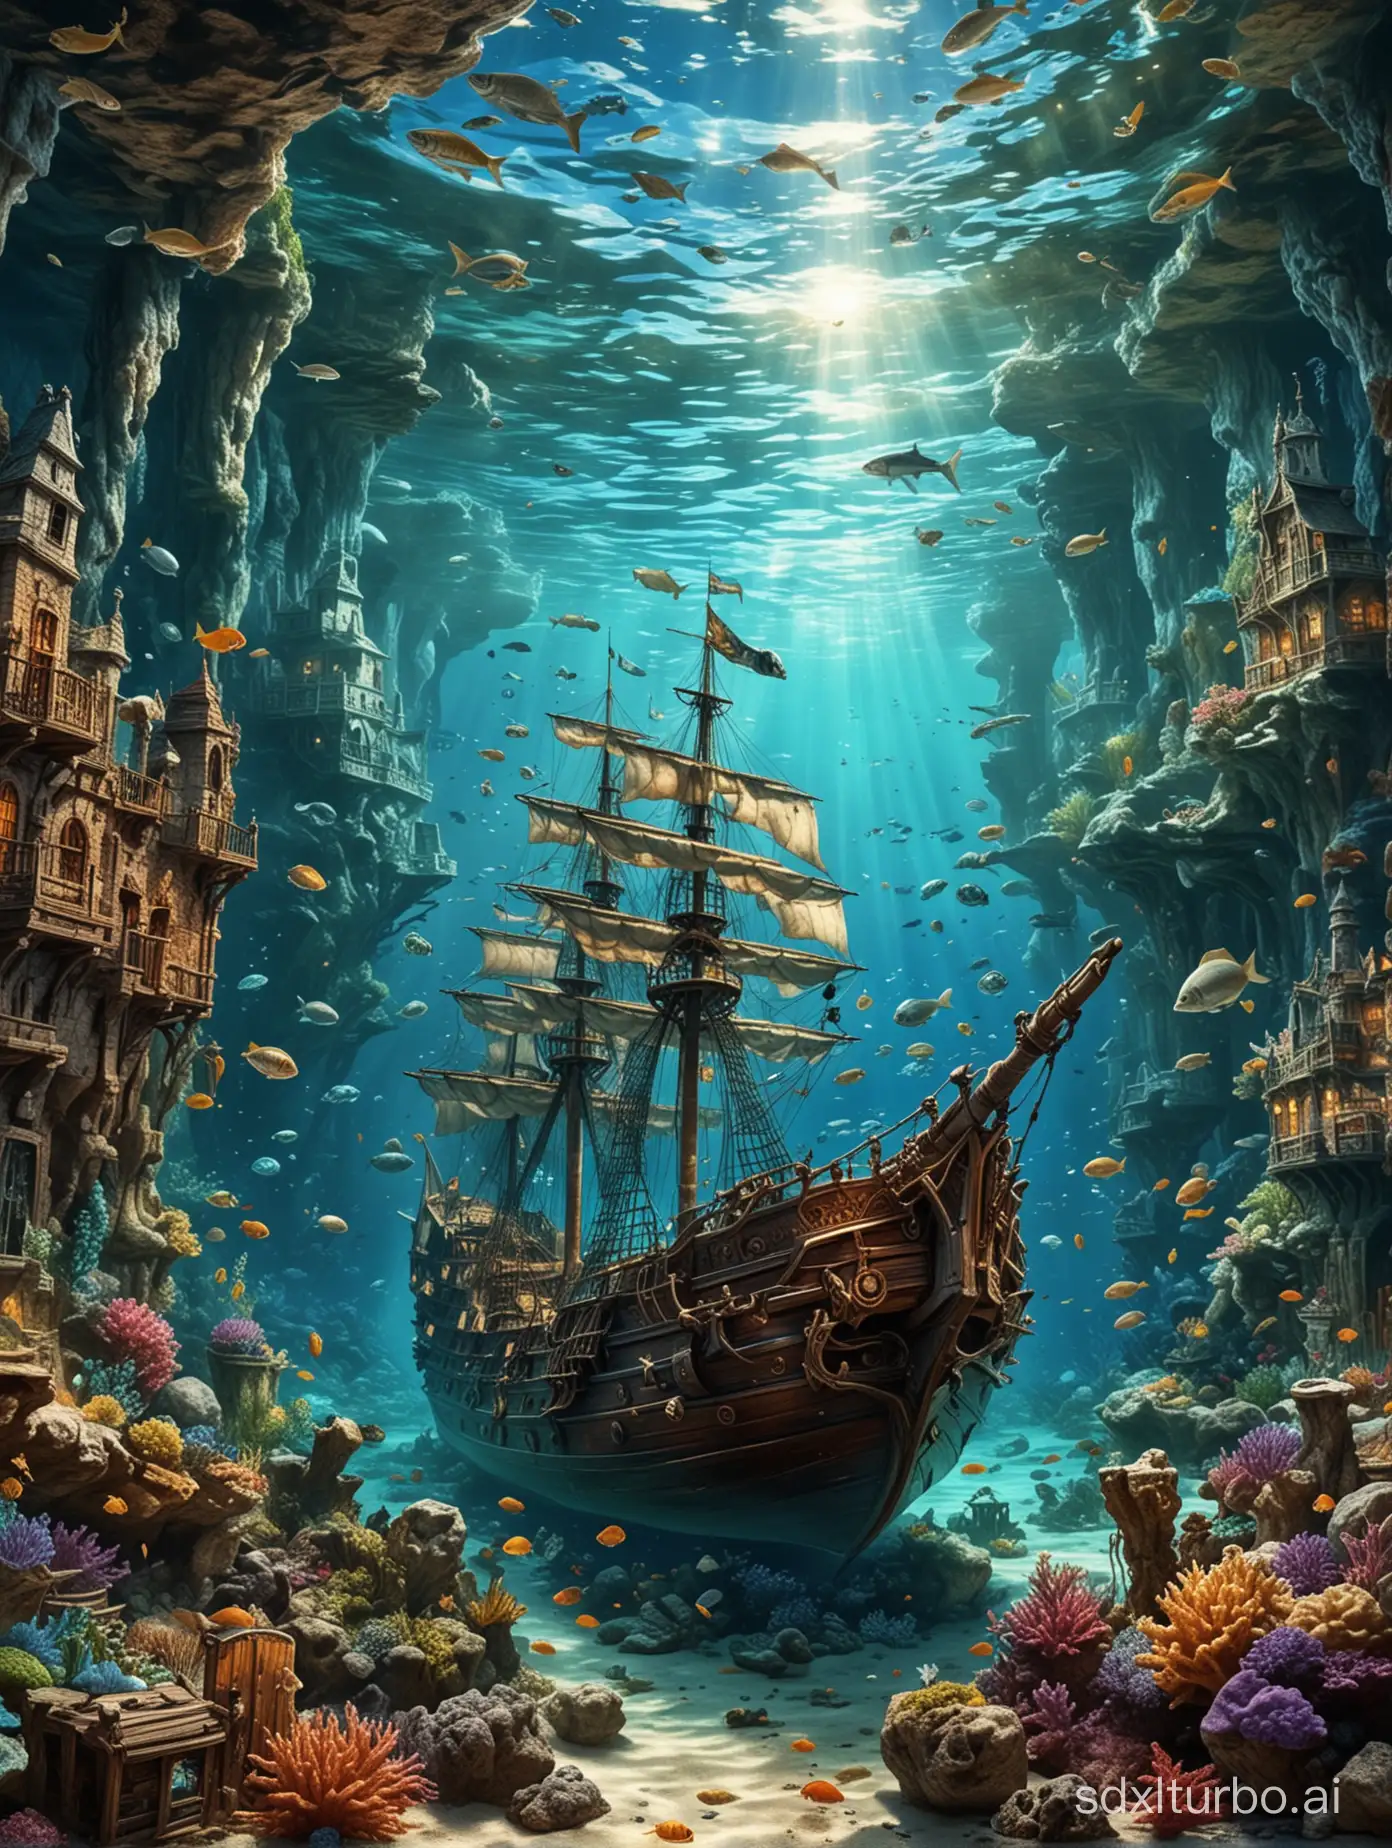 Under sea, old ships, treasure, castle, fishes, beautiful, high defination image, 